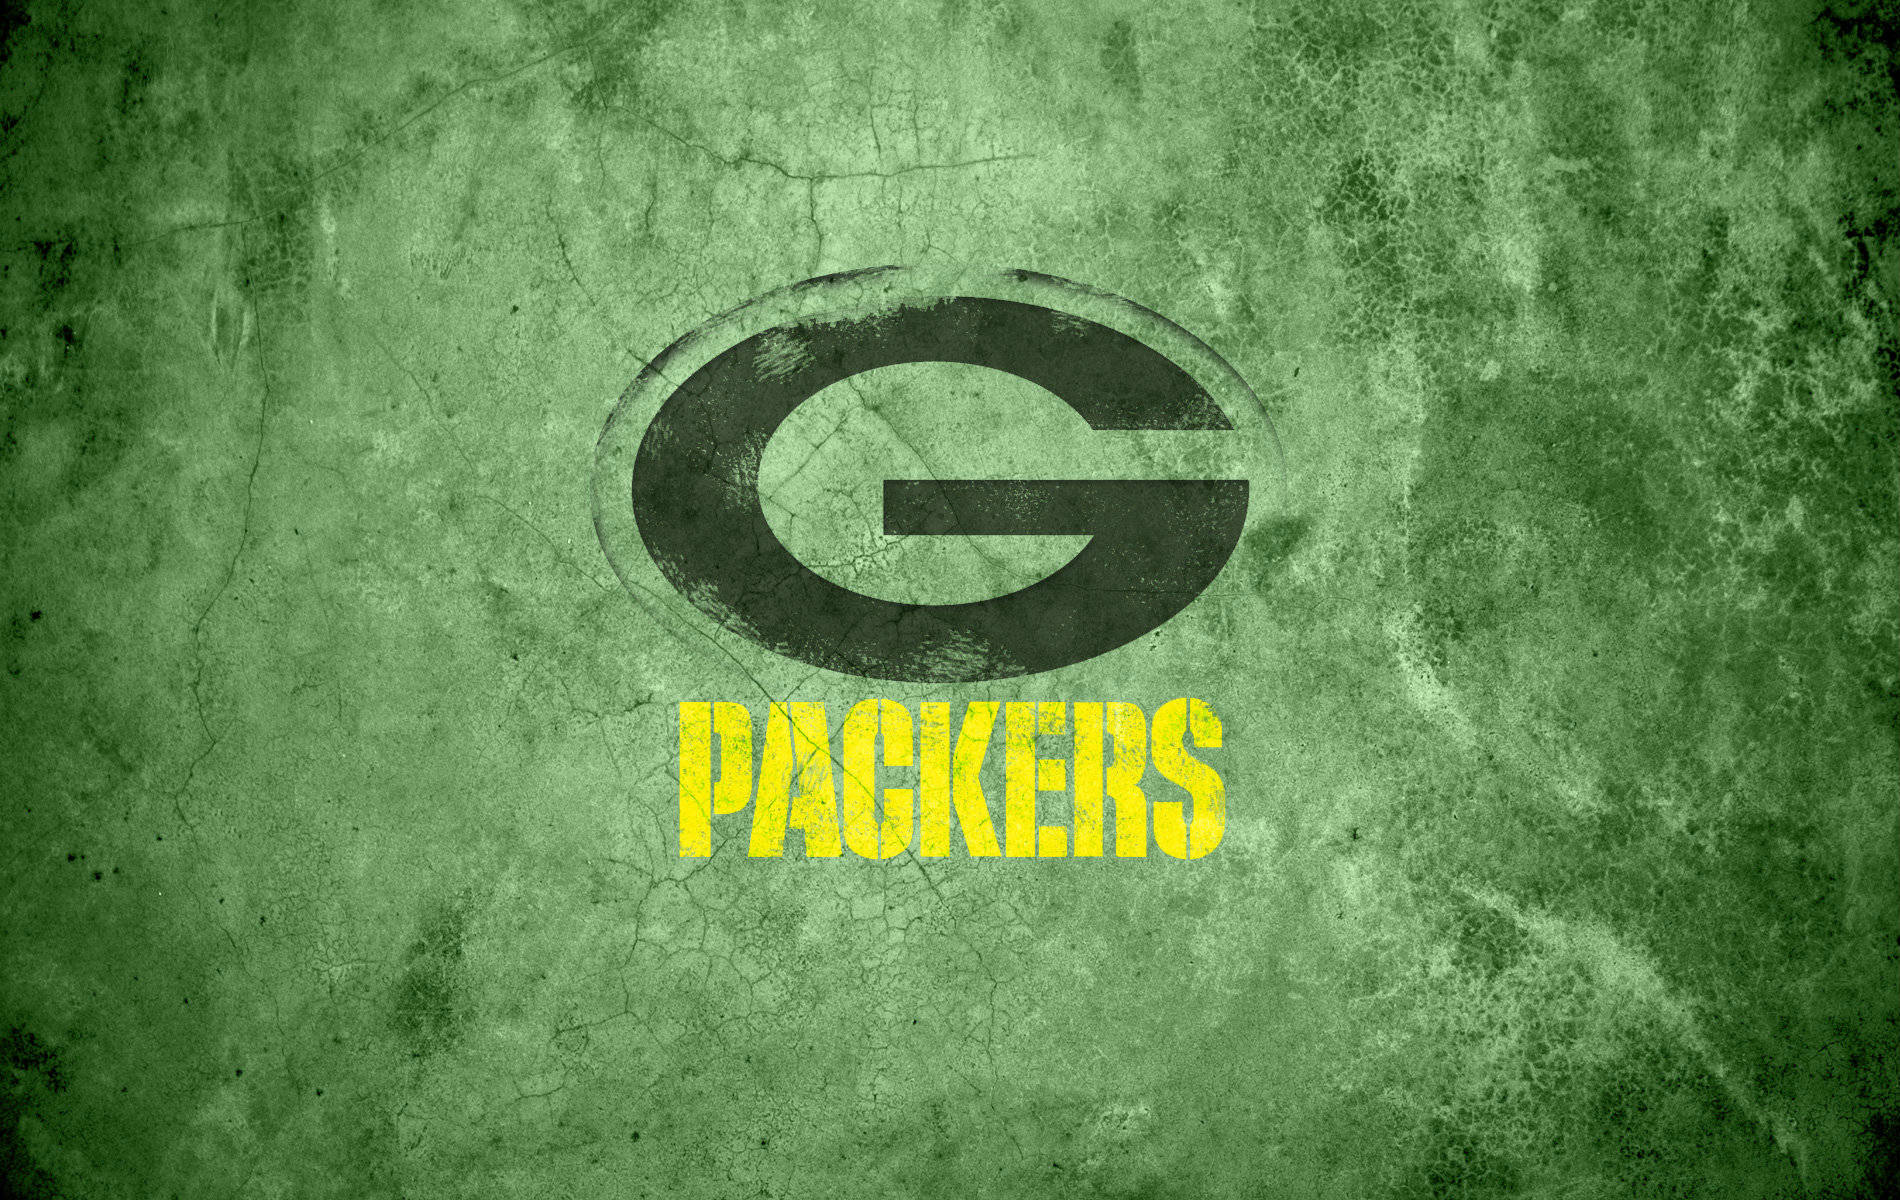 Green Bay Packers Football Club Background